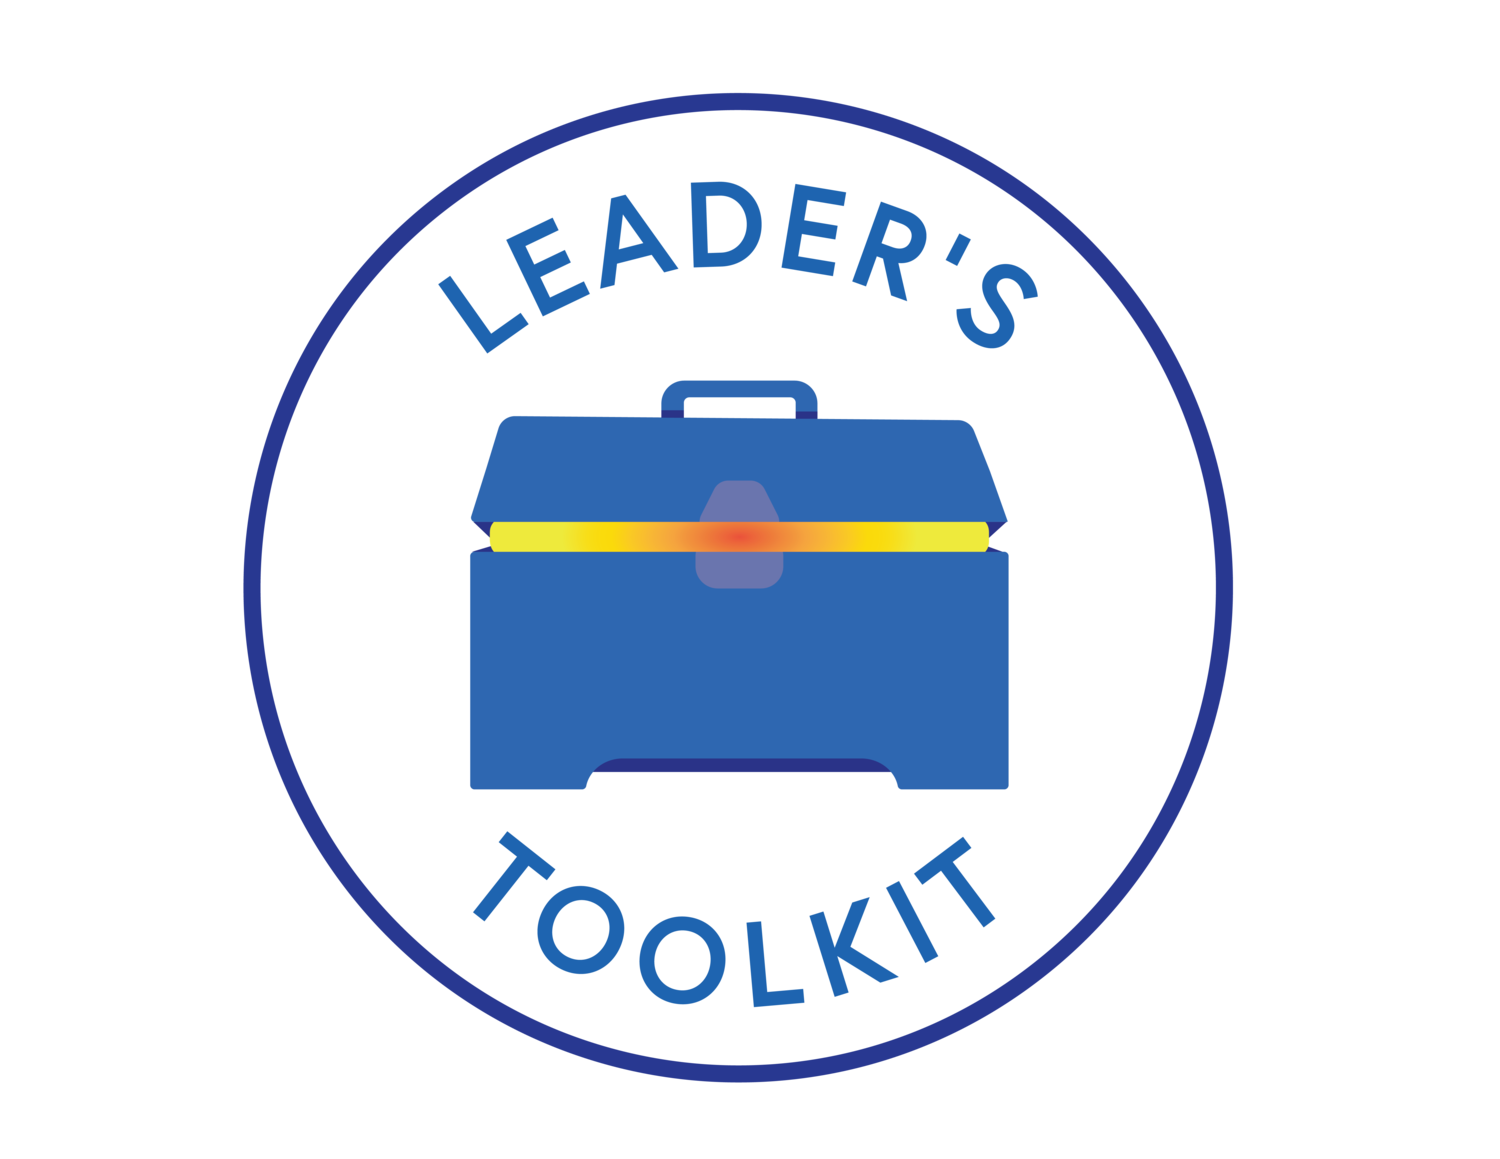 Leader's Toolkit